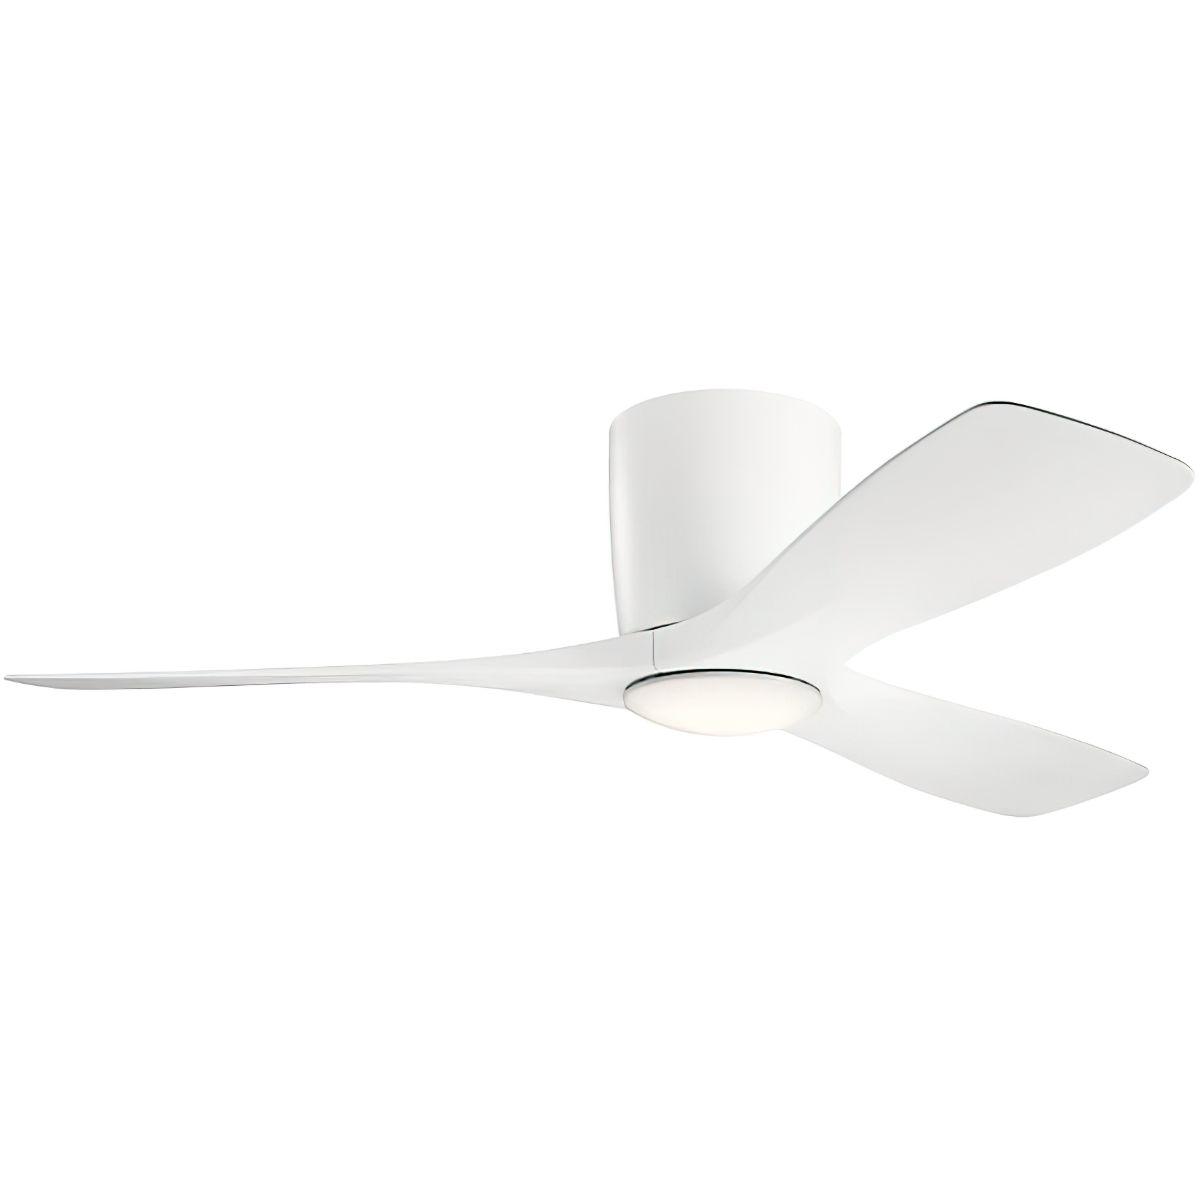 Volos 48 Inch Contemporary Ceiling Fan With Light, Wall Control Included - Bees Lighting